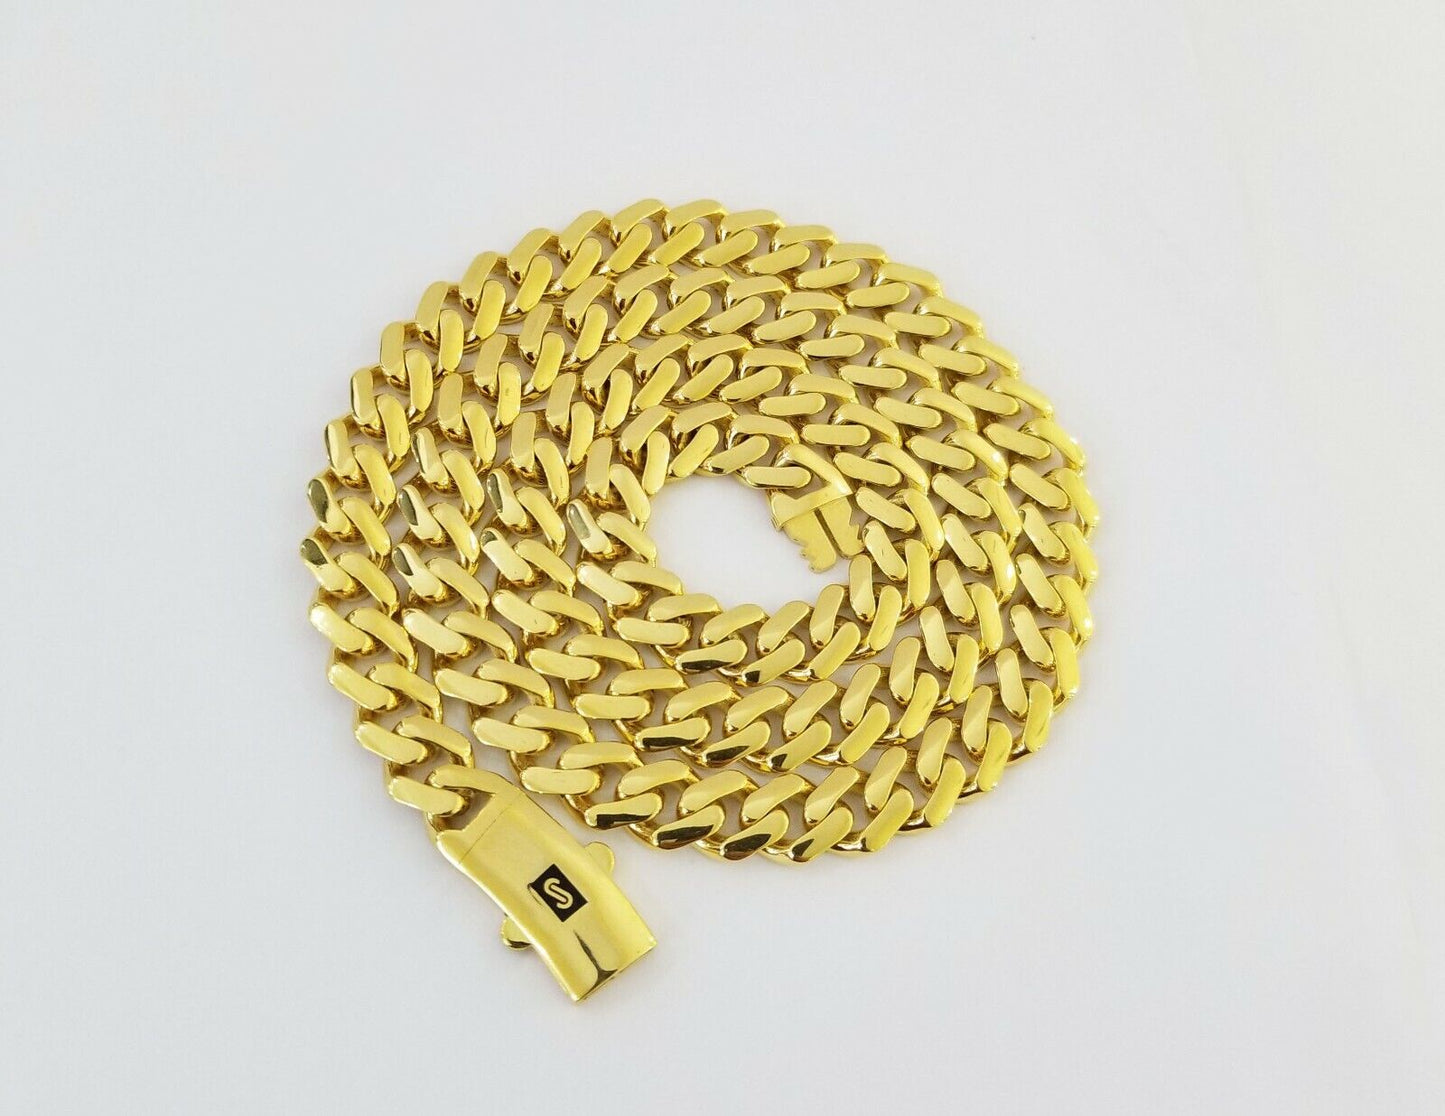 Real 10k Cuban Link Royal Monaco Chain necklace 9mm 26" inch Box Clasp 10kt Gold